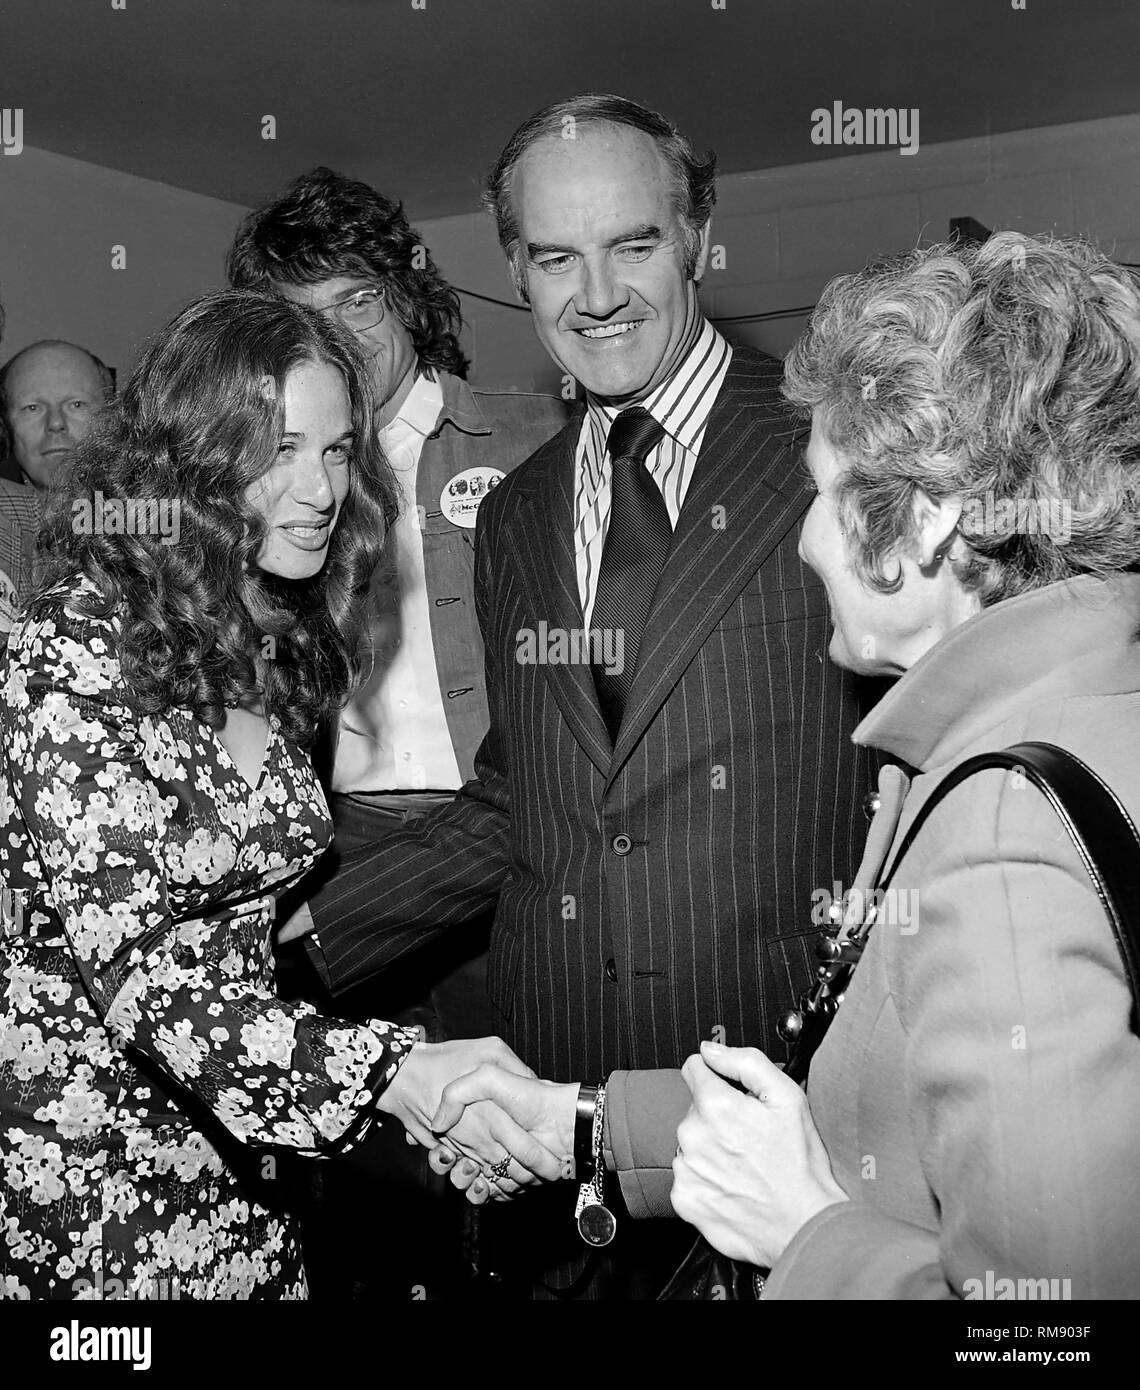 Singer Carole King greets Eleanor McGovern, wife of presidential candidate George McGovern before a fundraising concert in April 15, 1972 at The Forum in Los Angeles featuring James Taylor, Carole KIng, Barbra Streisand and Quincy Jones. Stock Photo